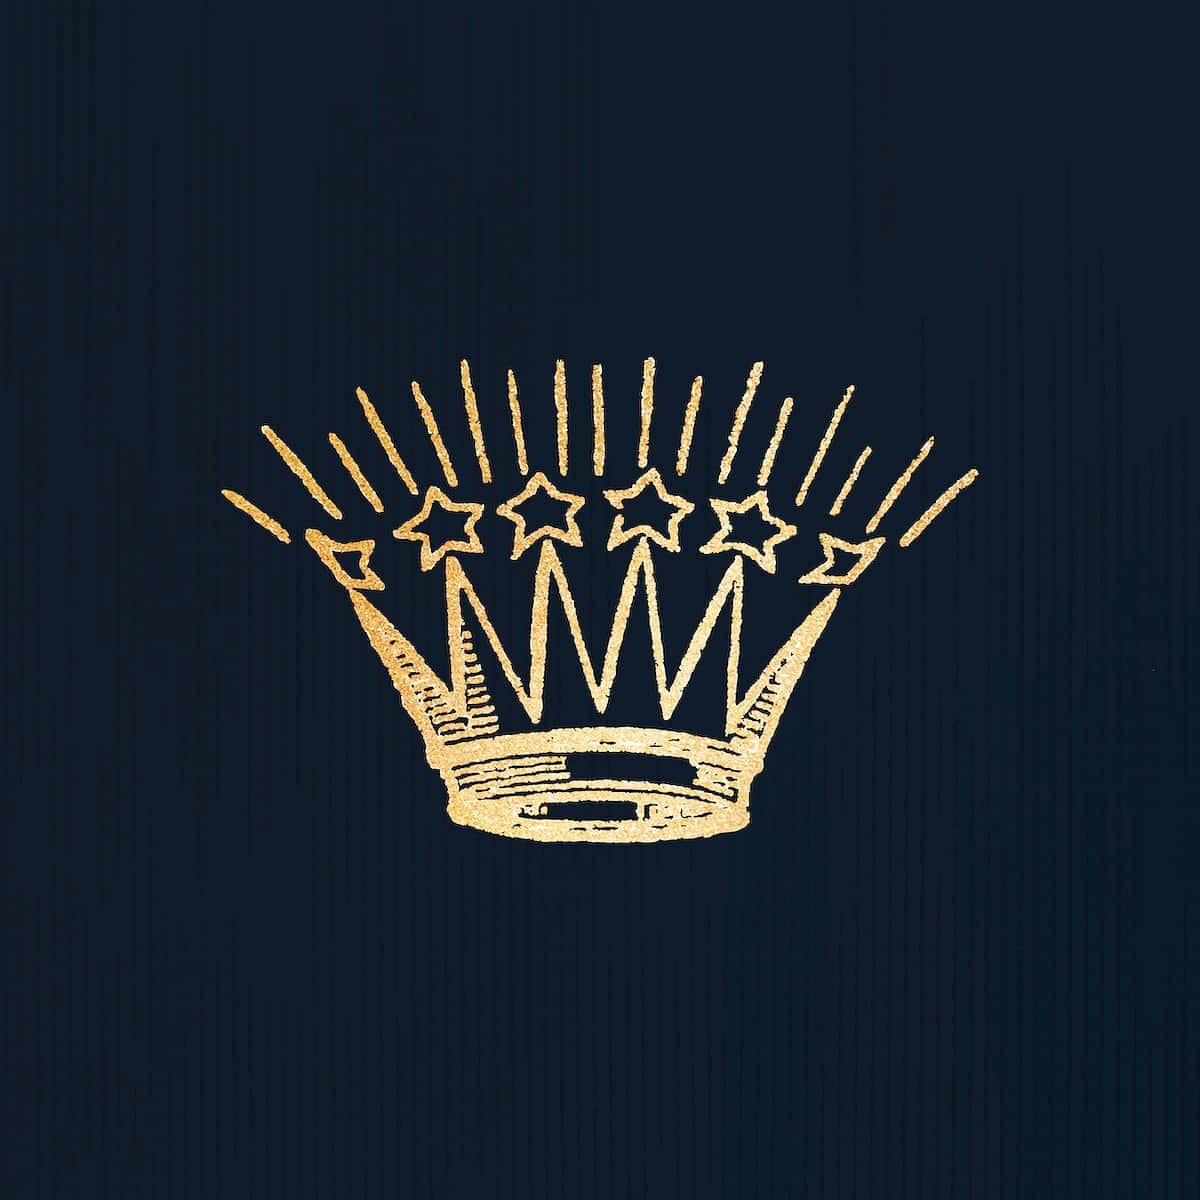 Glistening Diamond Crown - Fit for Royalty